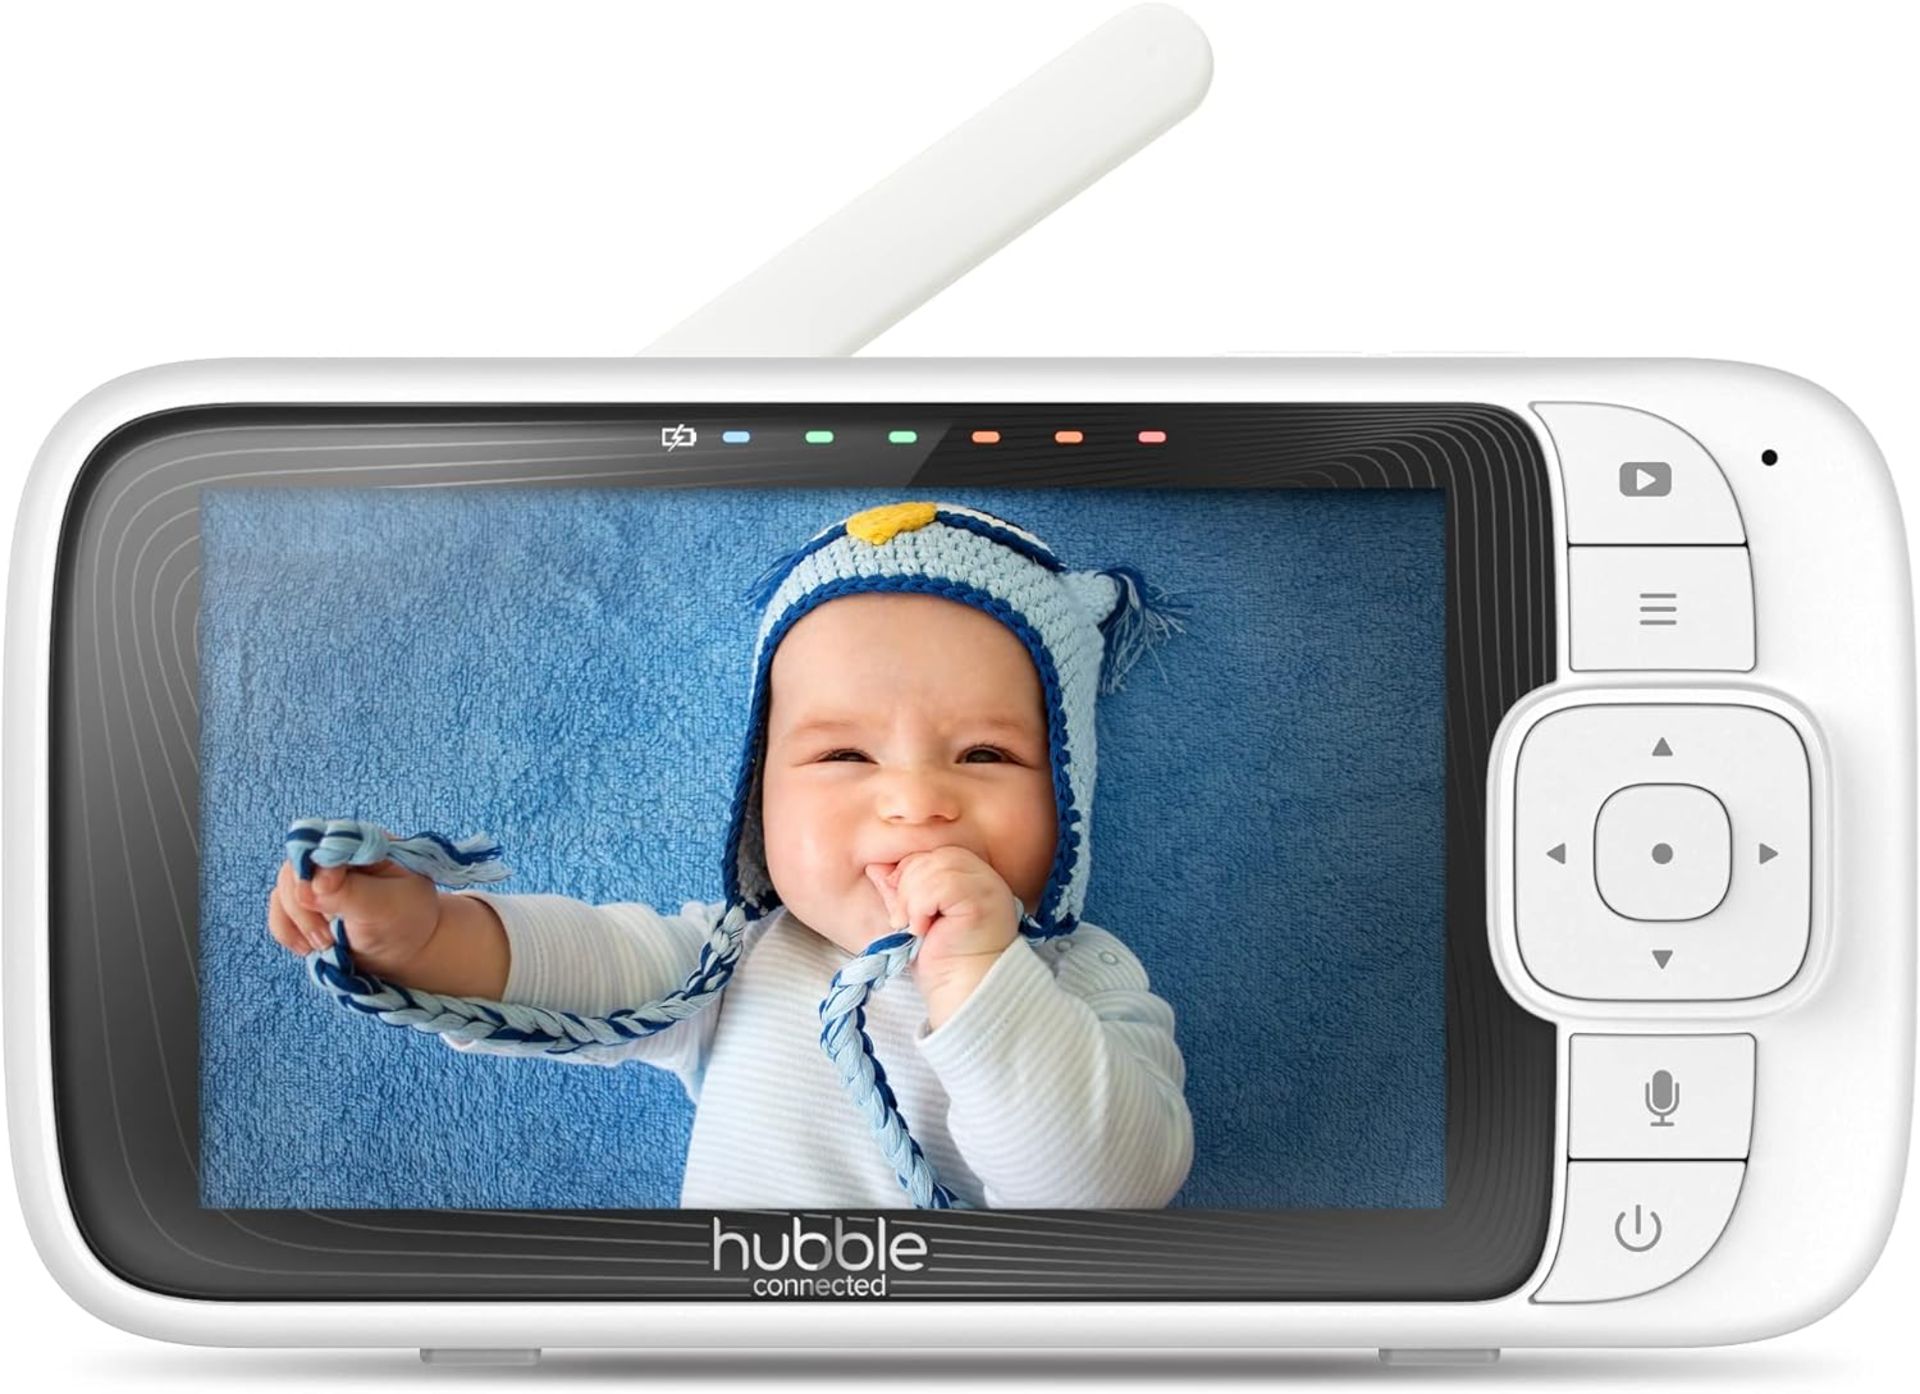 HUBBLE Nursery Pal Link Premium Baby Monitor. RRP £149. HubbleClub App Connected, with Room